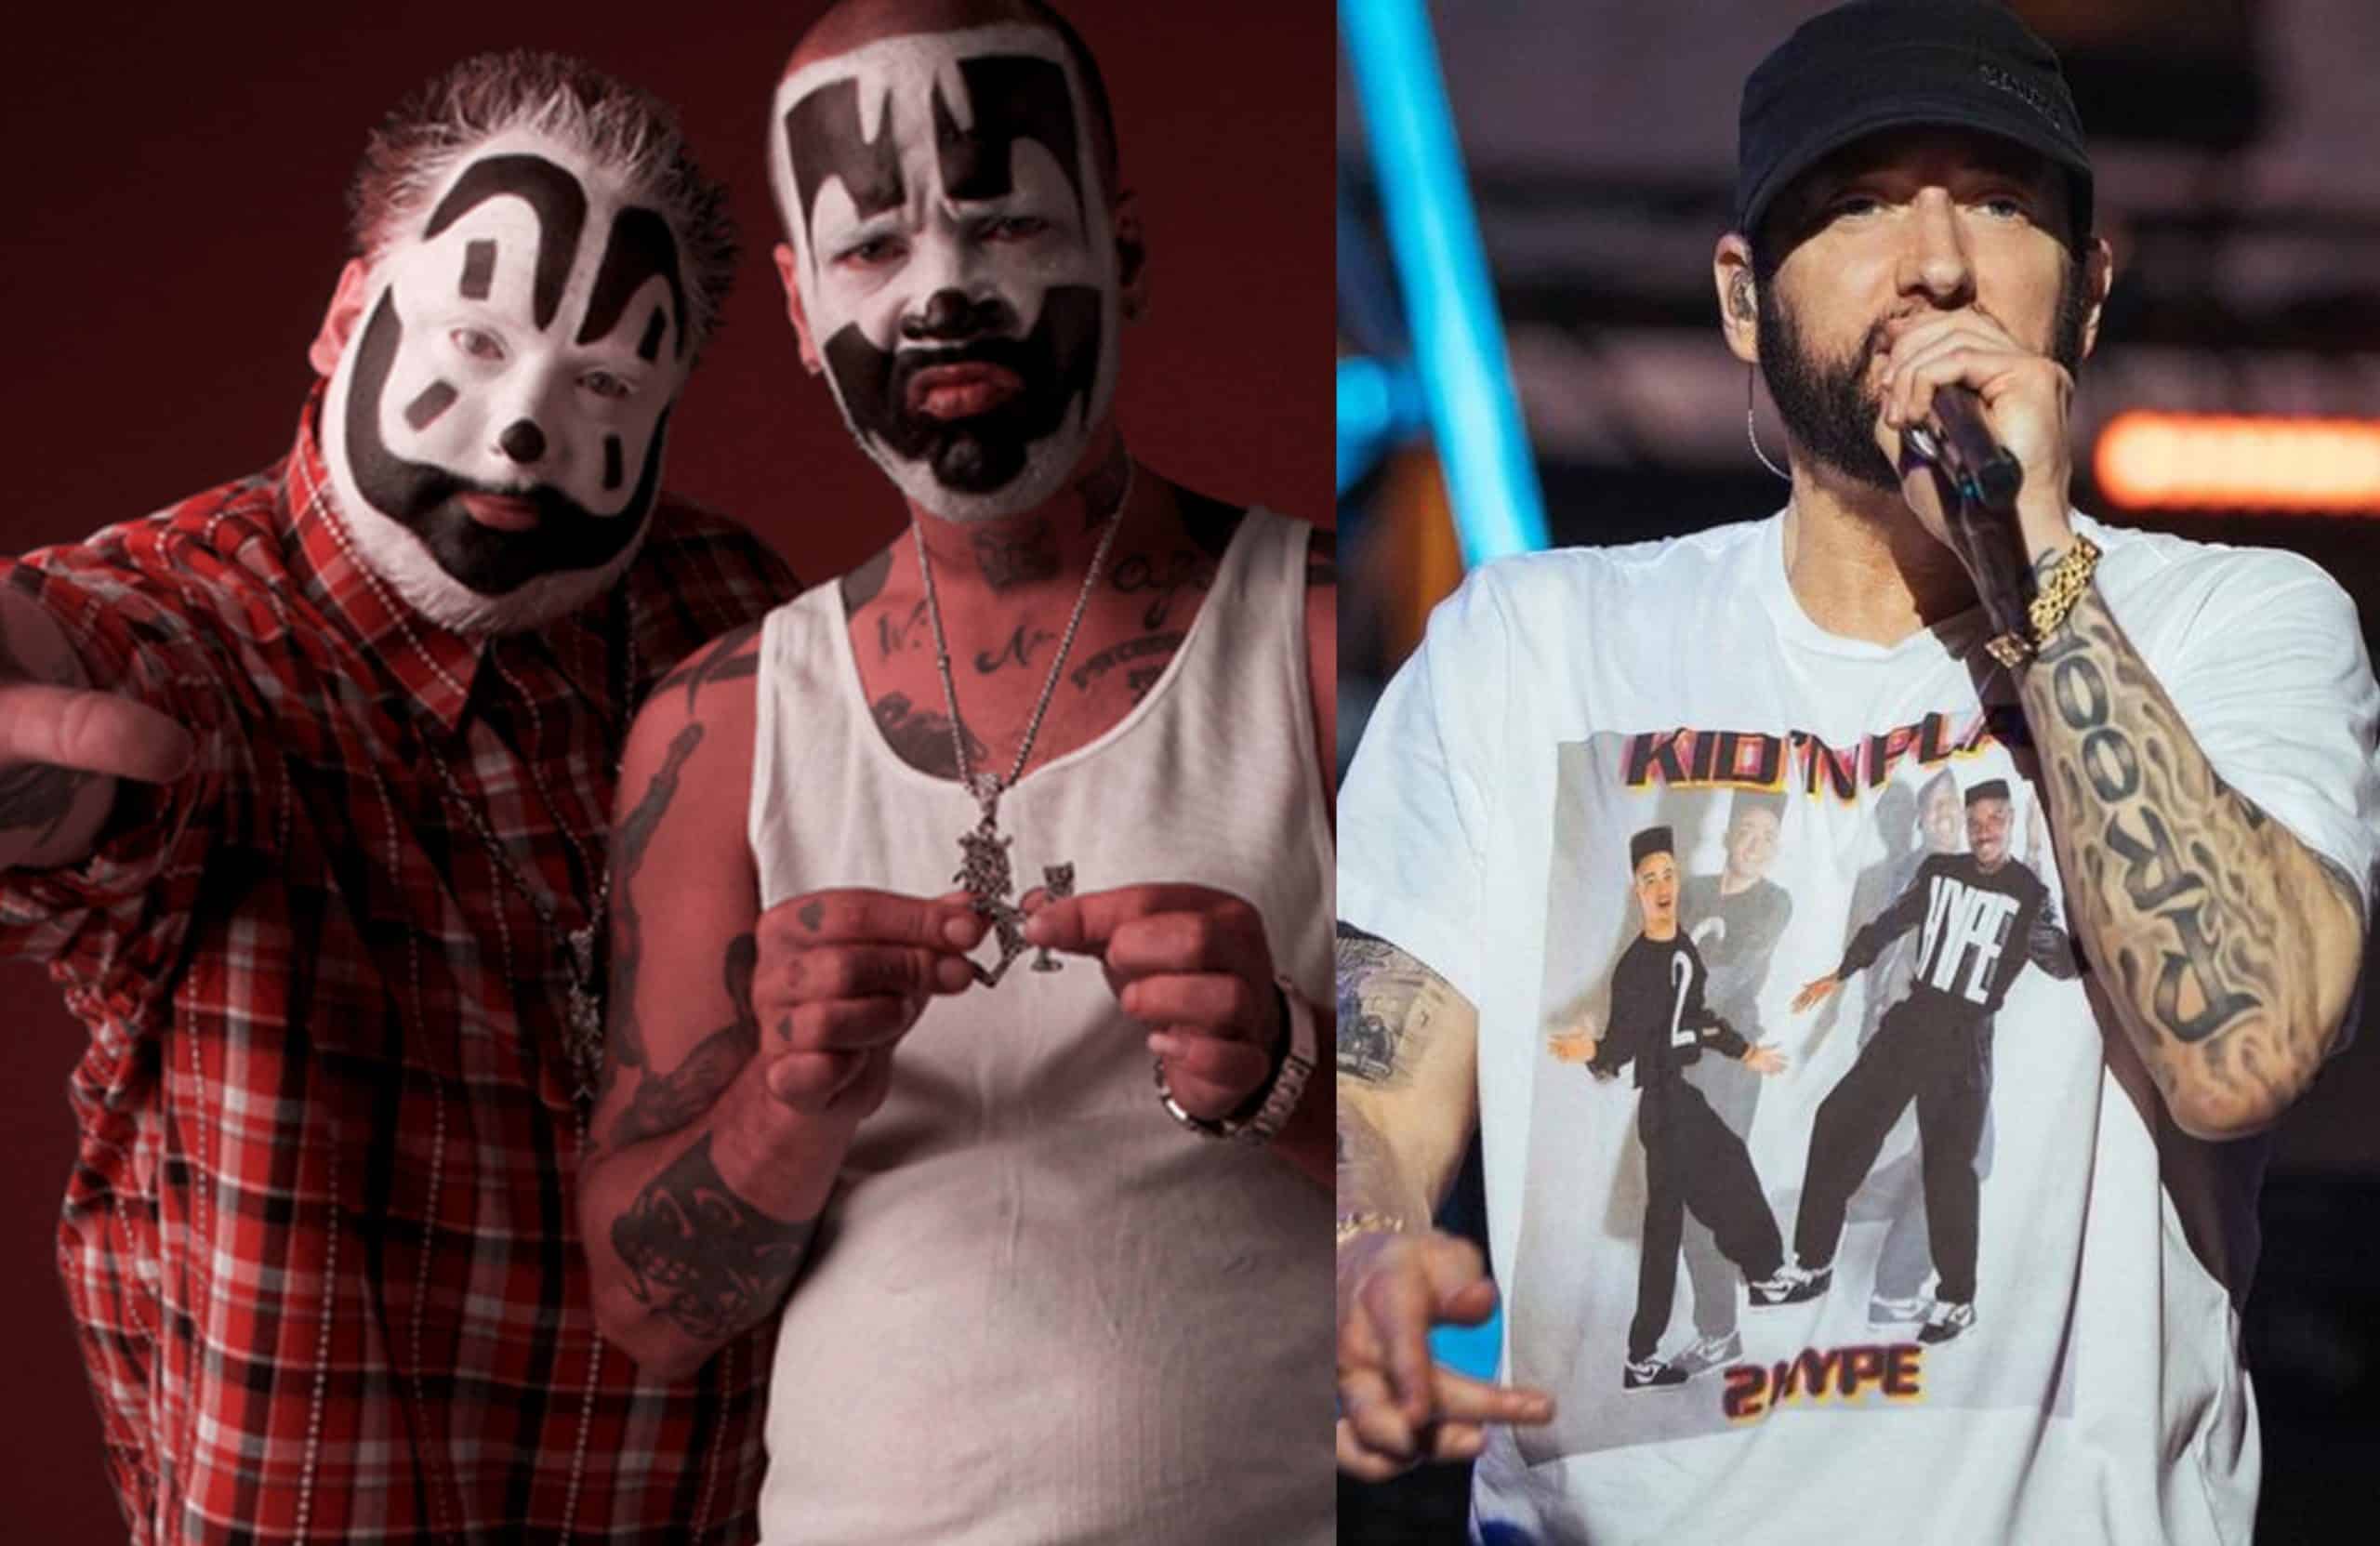 Insane Clown Pose Says Their Feud with Eminem was Hip-Hop History